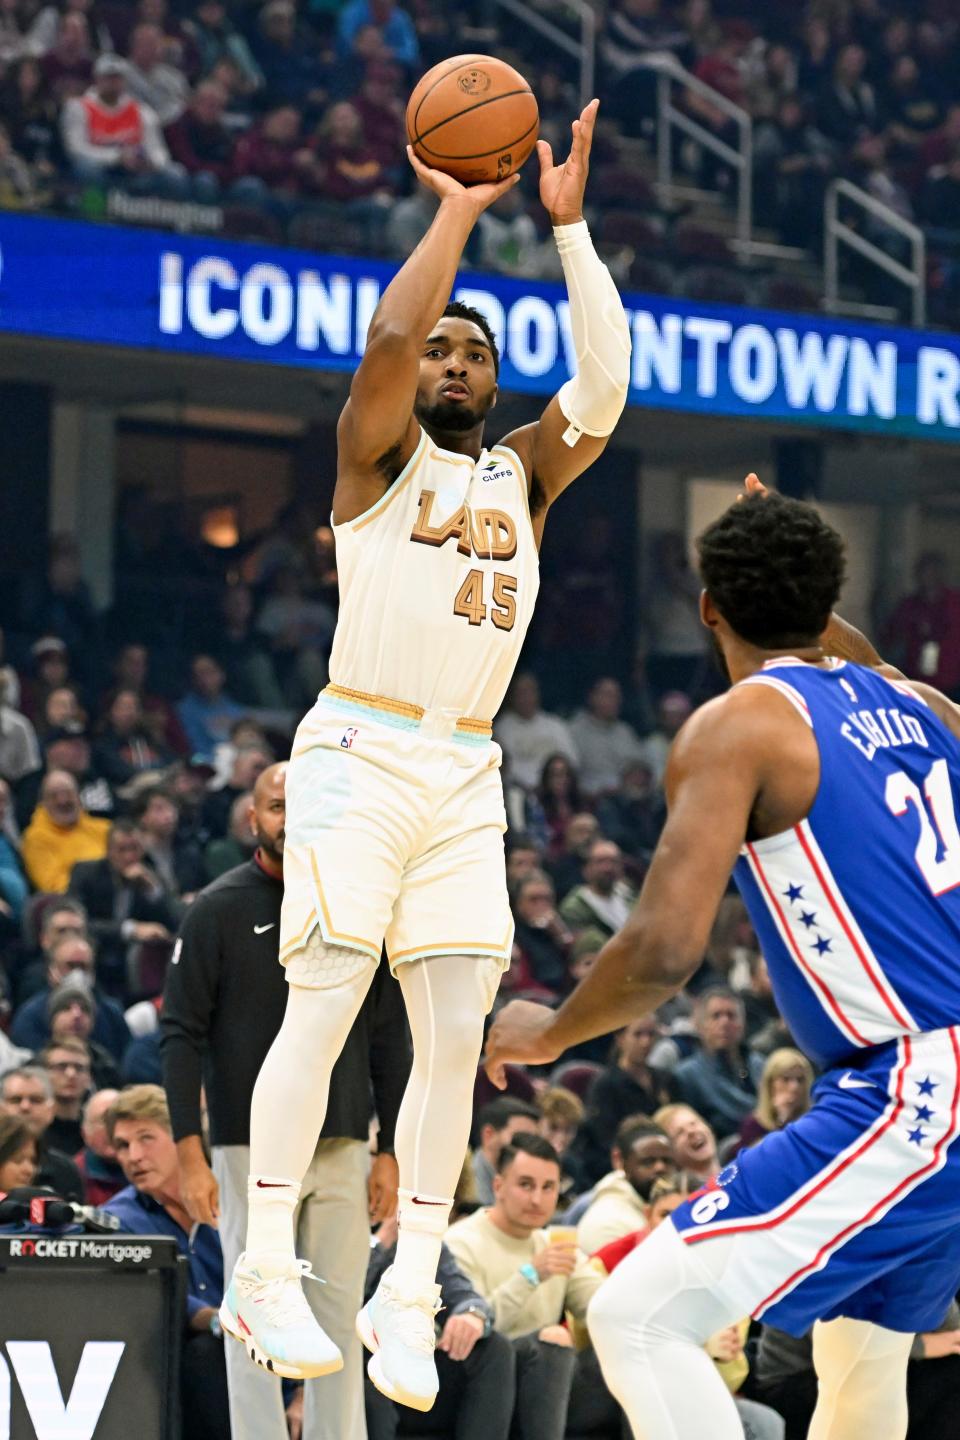 Cleveland Cavaliers guard Donovan Mitchell shoots a three-point basket during the first half of an NBA basketball game against the Philadelphia 76ers, Wednesday, Nov. 30, 2022, in Cleveland. (AP Photo/Nick Cammett)